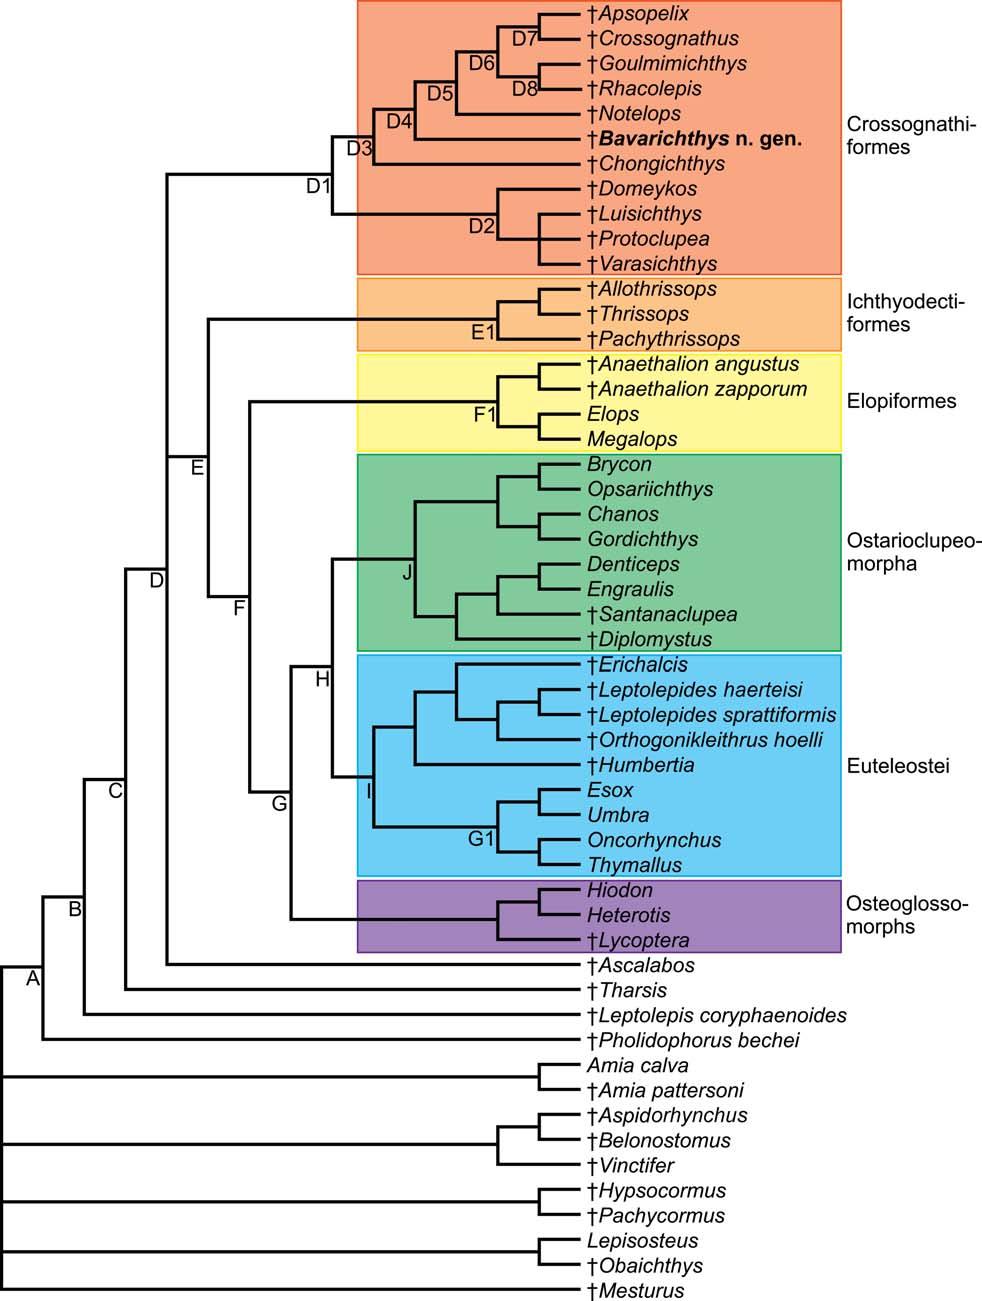 Fossil Record 13 (2) 2010, 317 341 331 Figure 12. Hypothesis of phylogenetic relationships of some fossil (y) and recent teleosts.